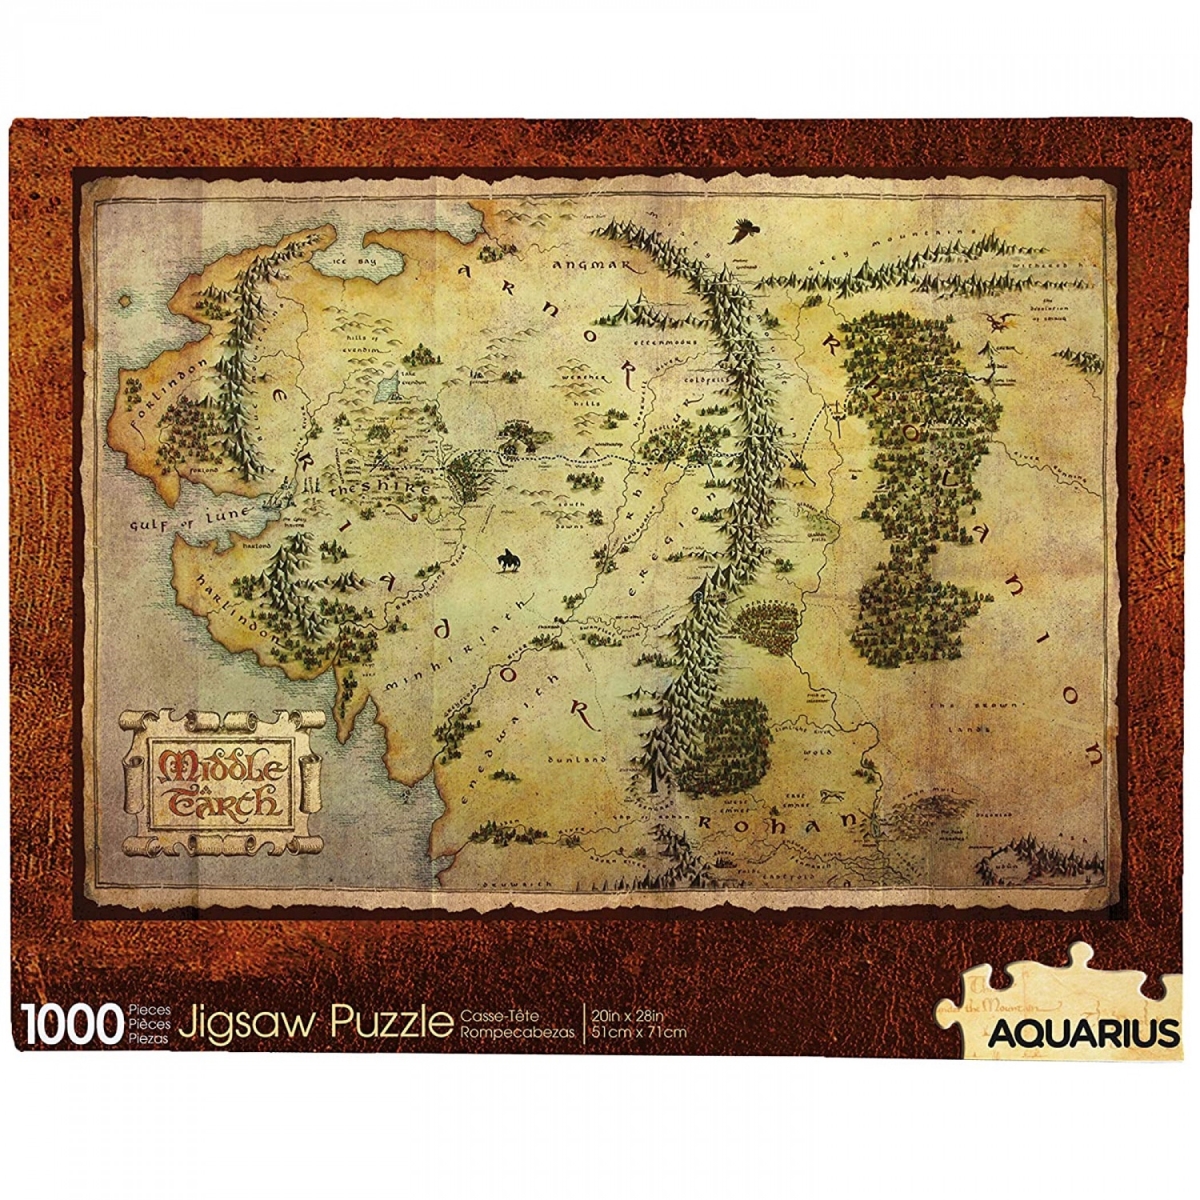 Lord of the Rings 820339 The Hobbit Map Jigsaw Puzzle - 1000 Piece